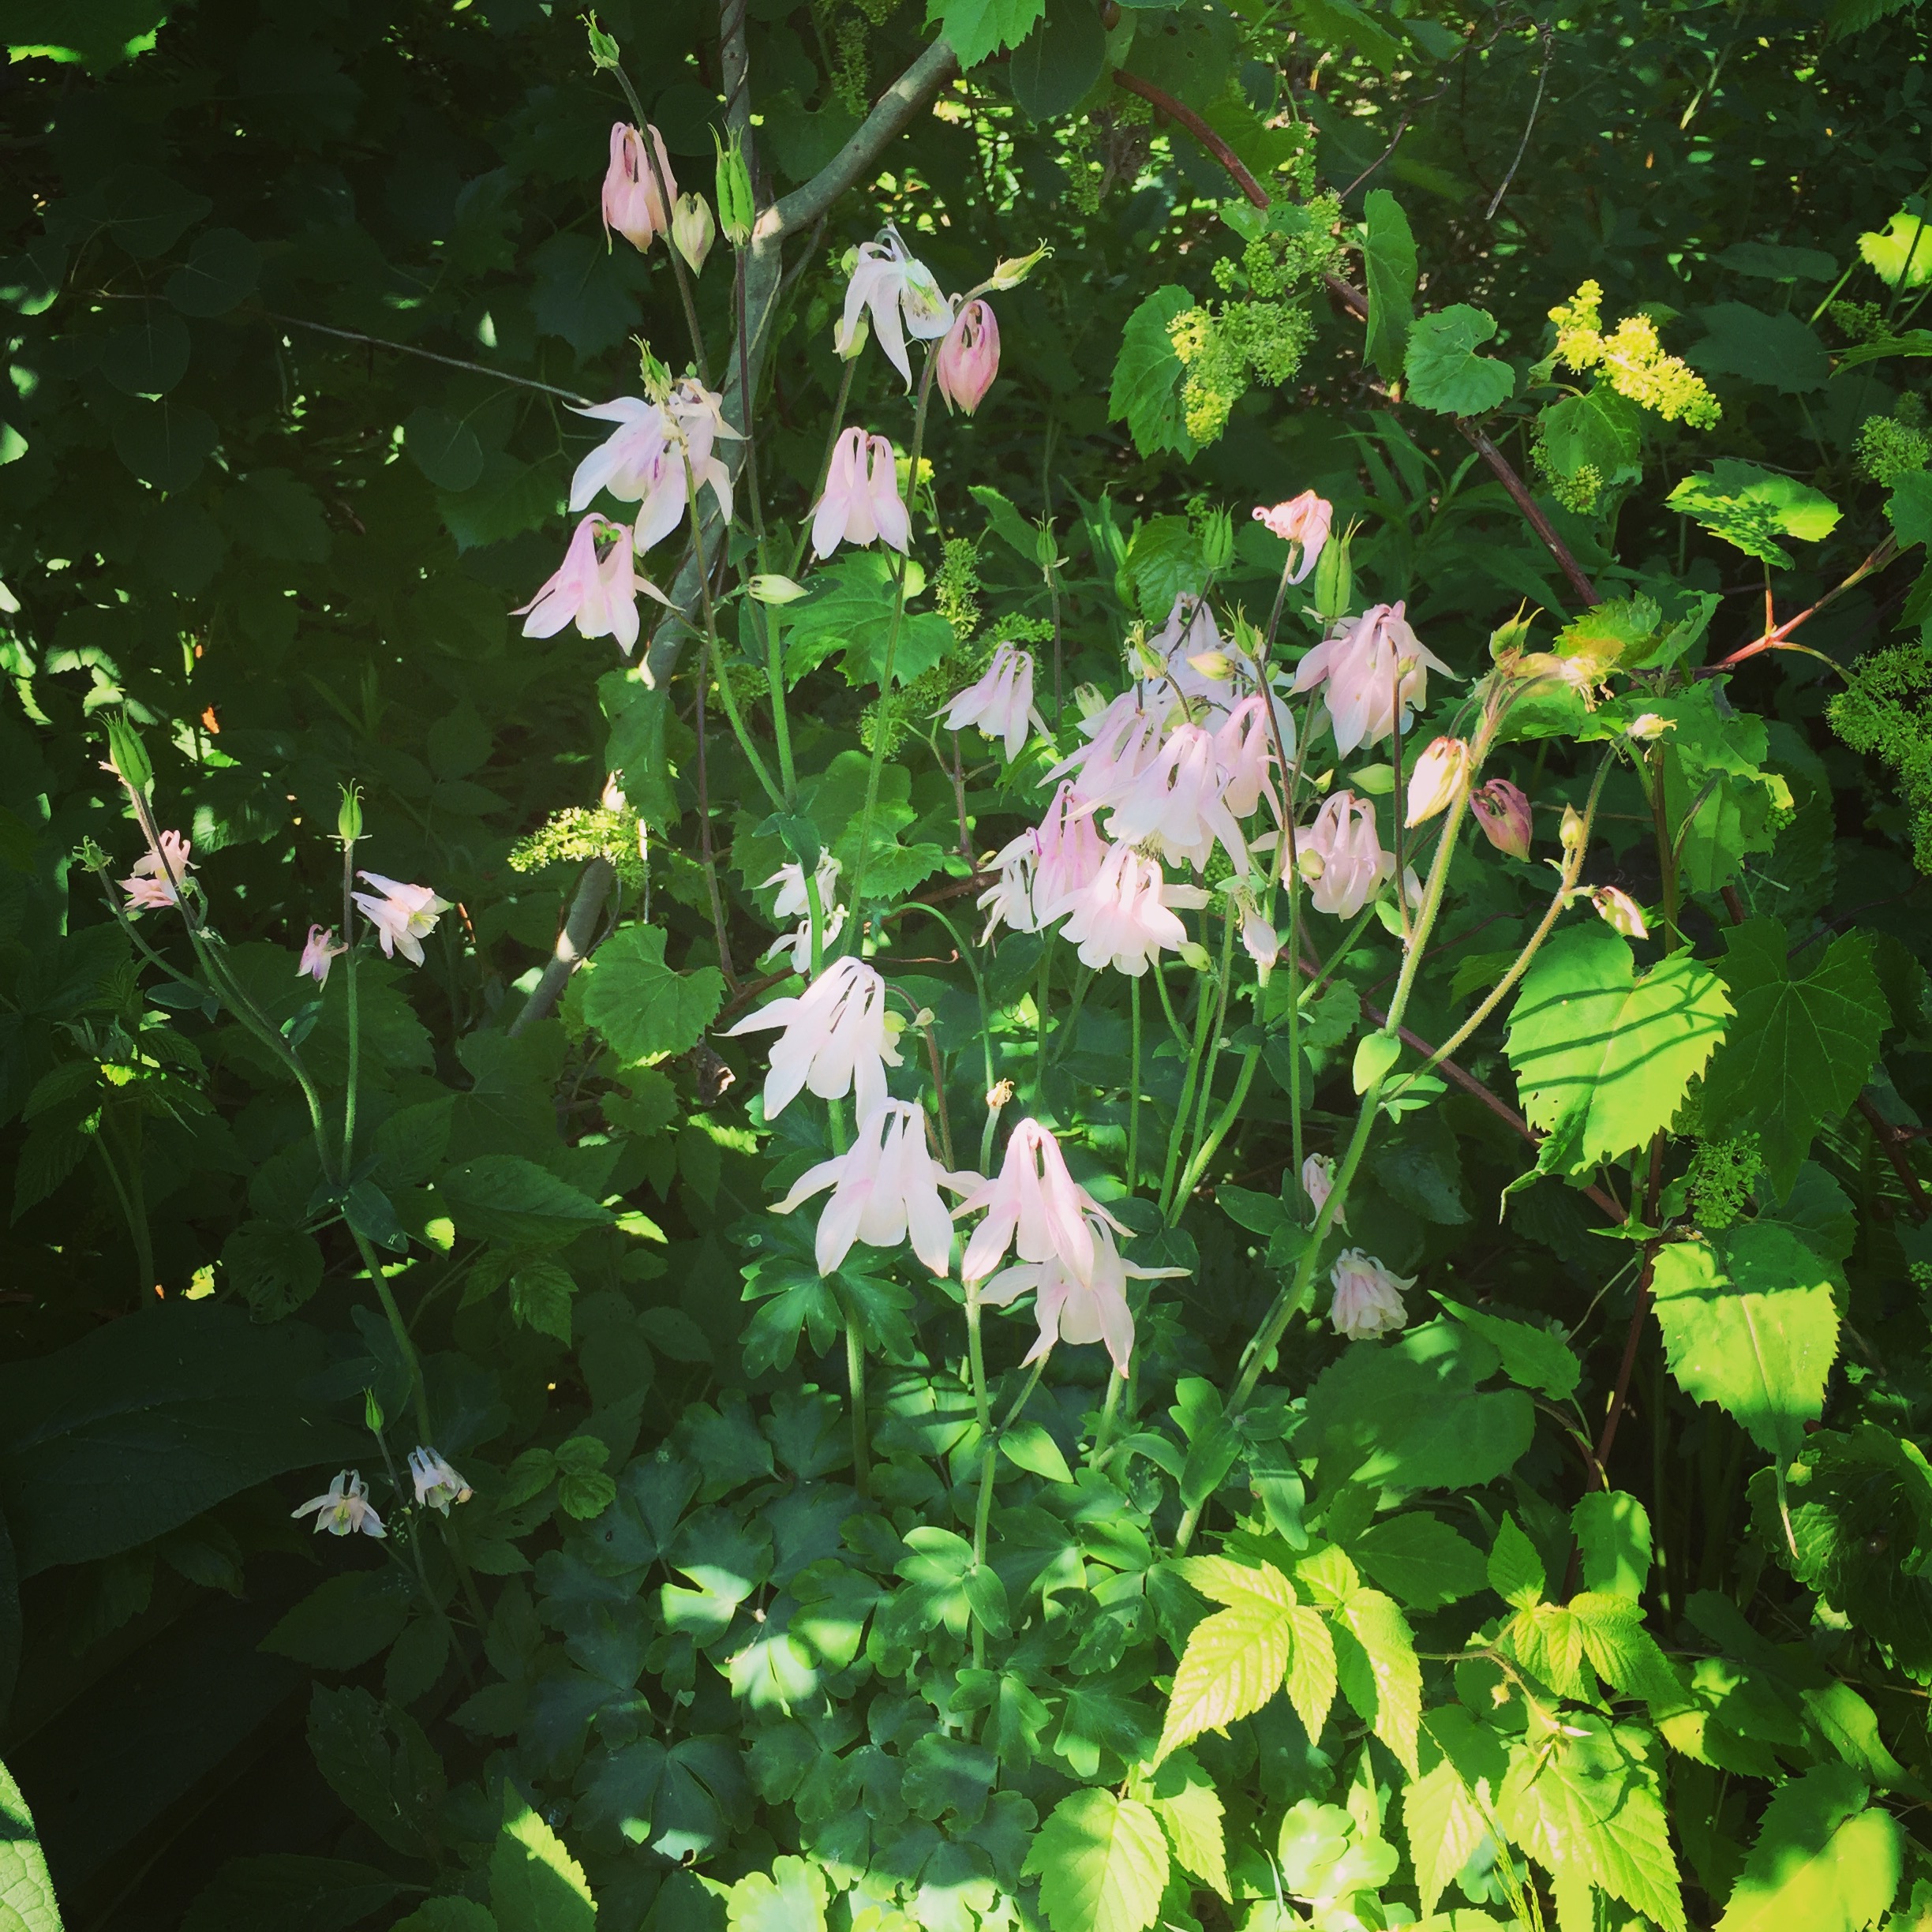  This volunteer pink columbine comes up each spring out of the middle of a rock wall, between the horseradish and the comfrey, and well shaded by an ancient hawthorn tree. Herbs always find a way. 